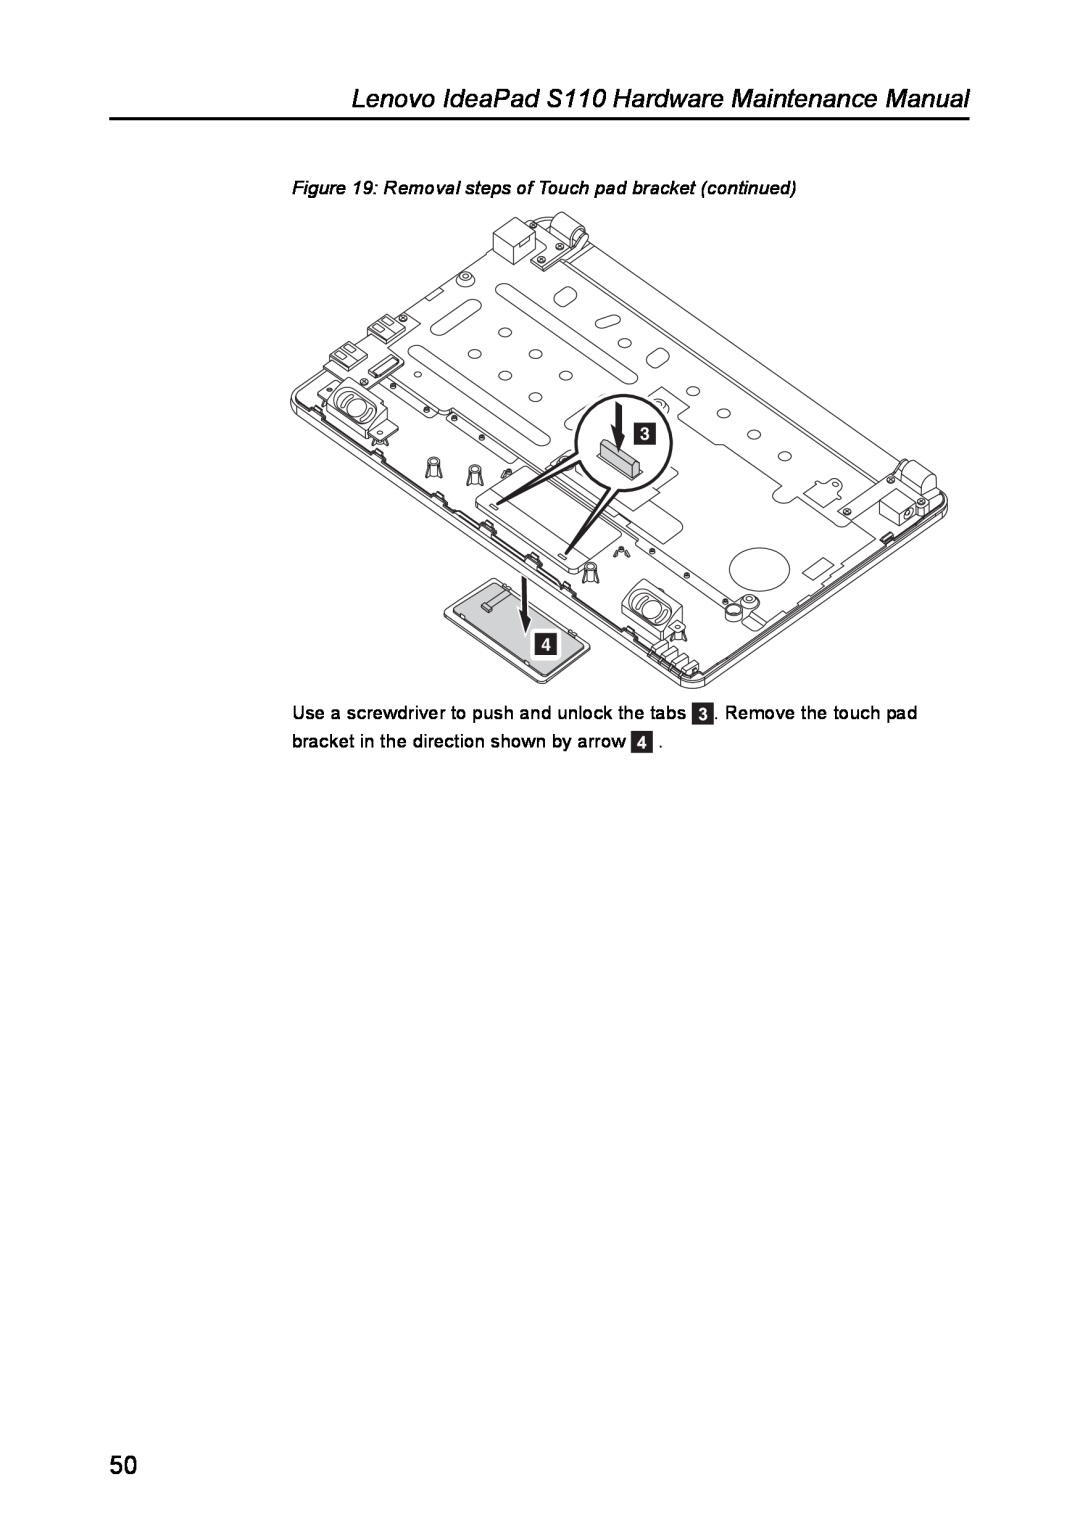 Lenovo manual Removal steps of Touch pad bracket continued, Lenovo IdeaPad S110 Hardware Maintenance Manual 